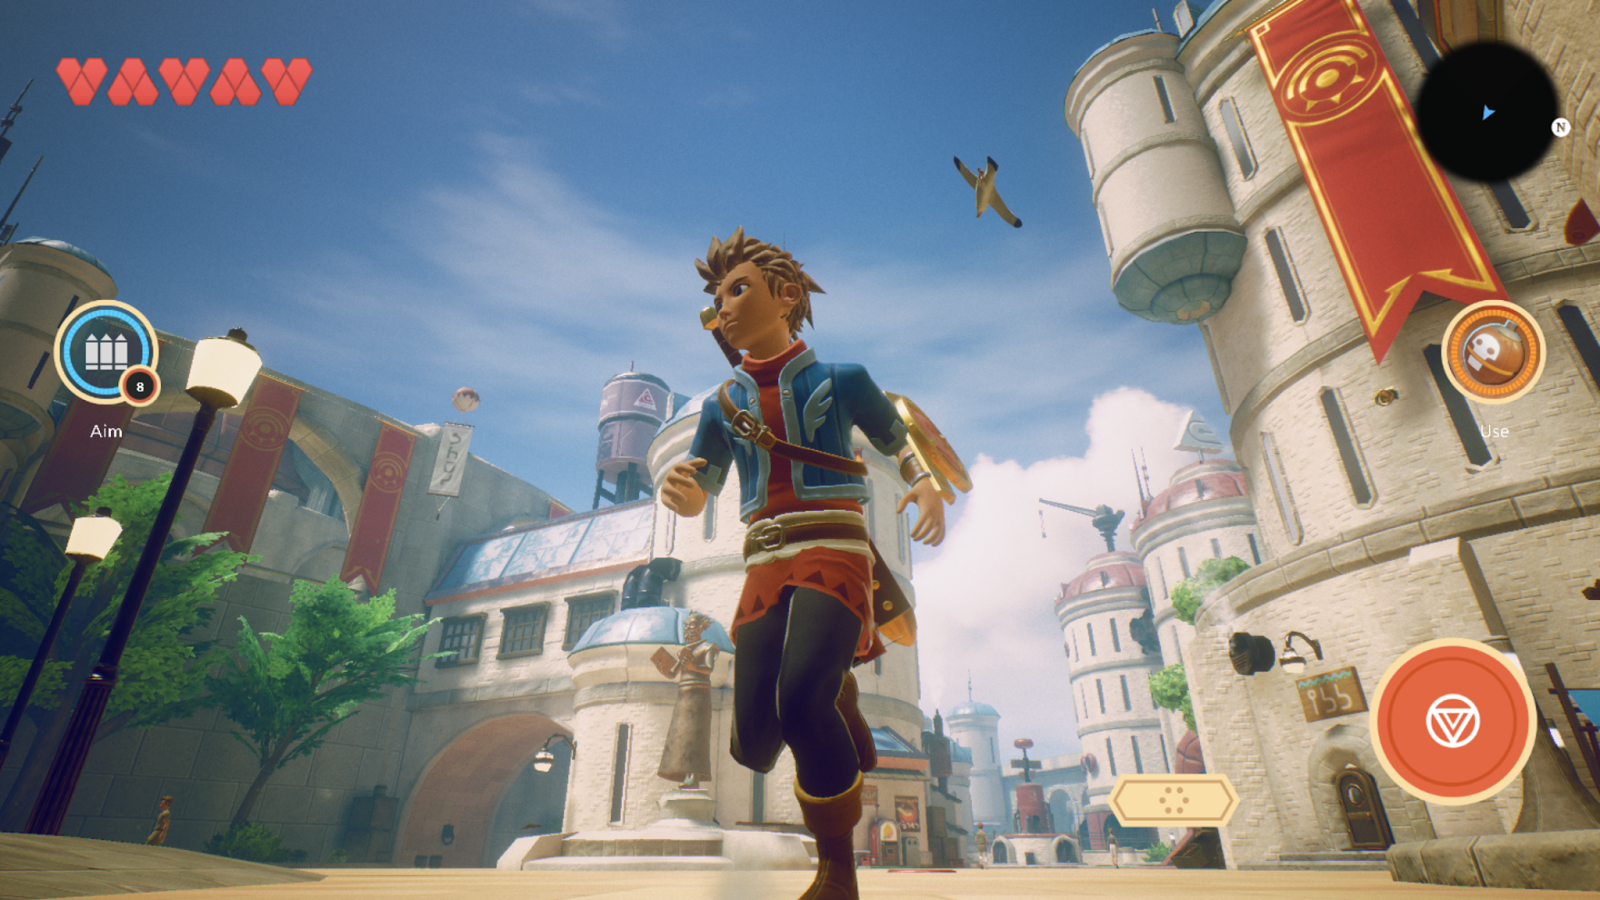 You Need to See This Stunning New GDC Trailer for 'Oceanhorn 2: Knights of the Lost Realm'